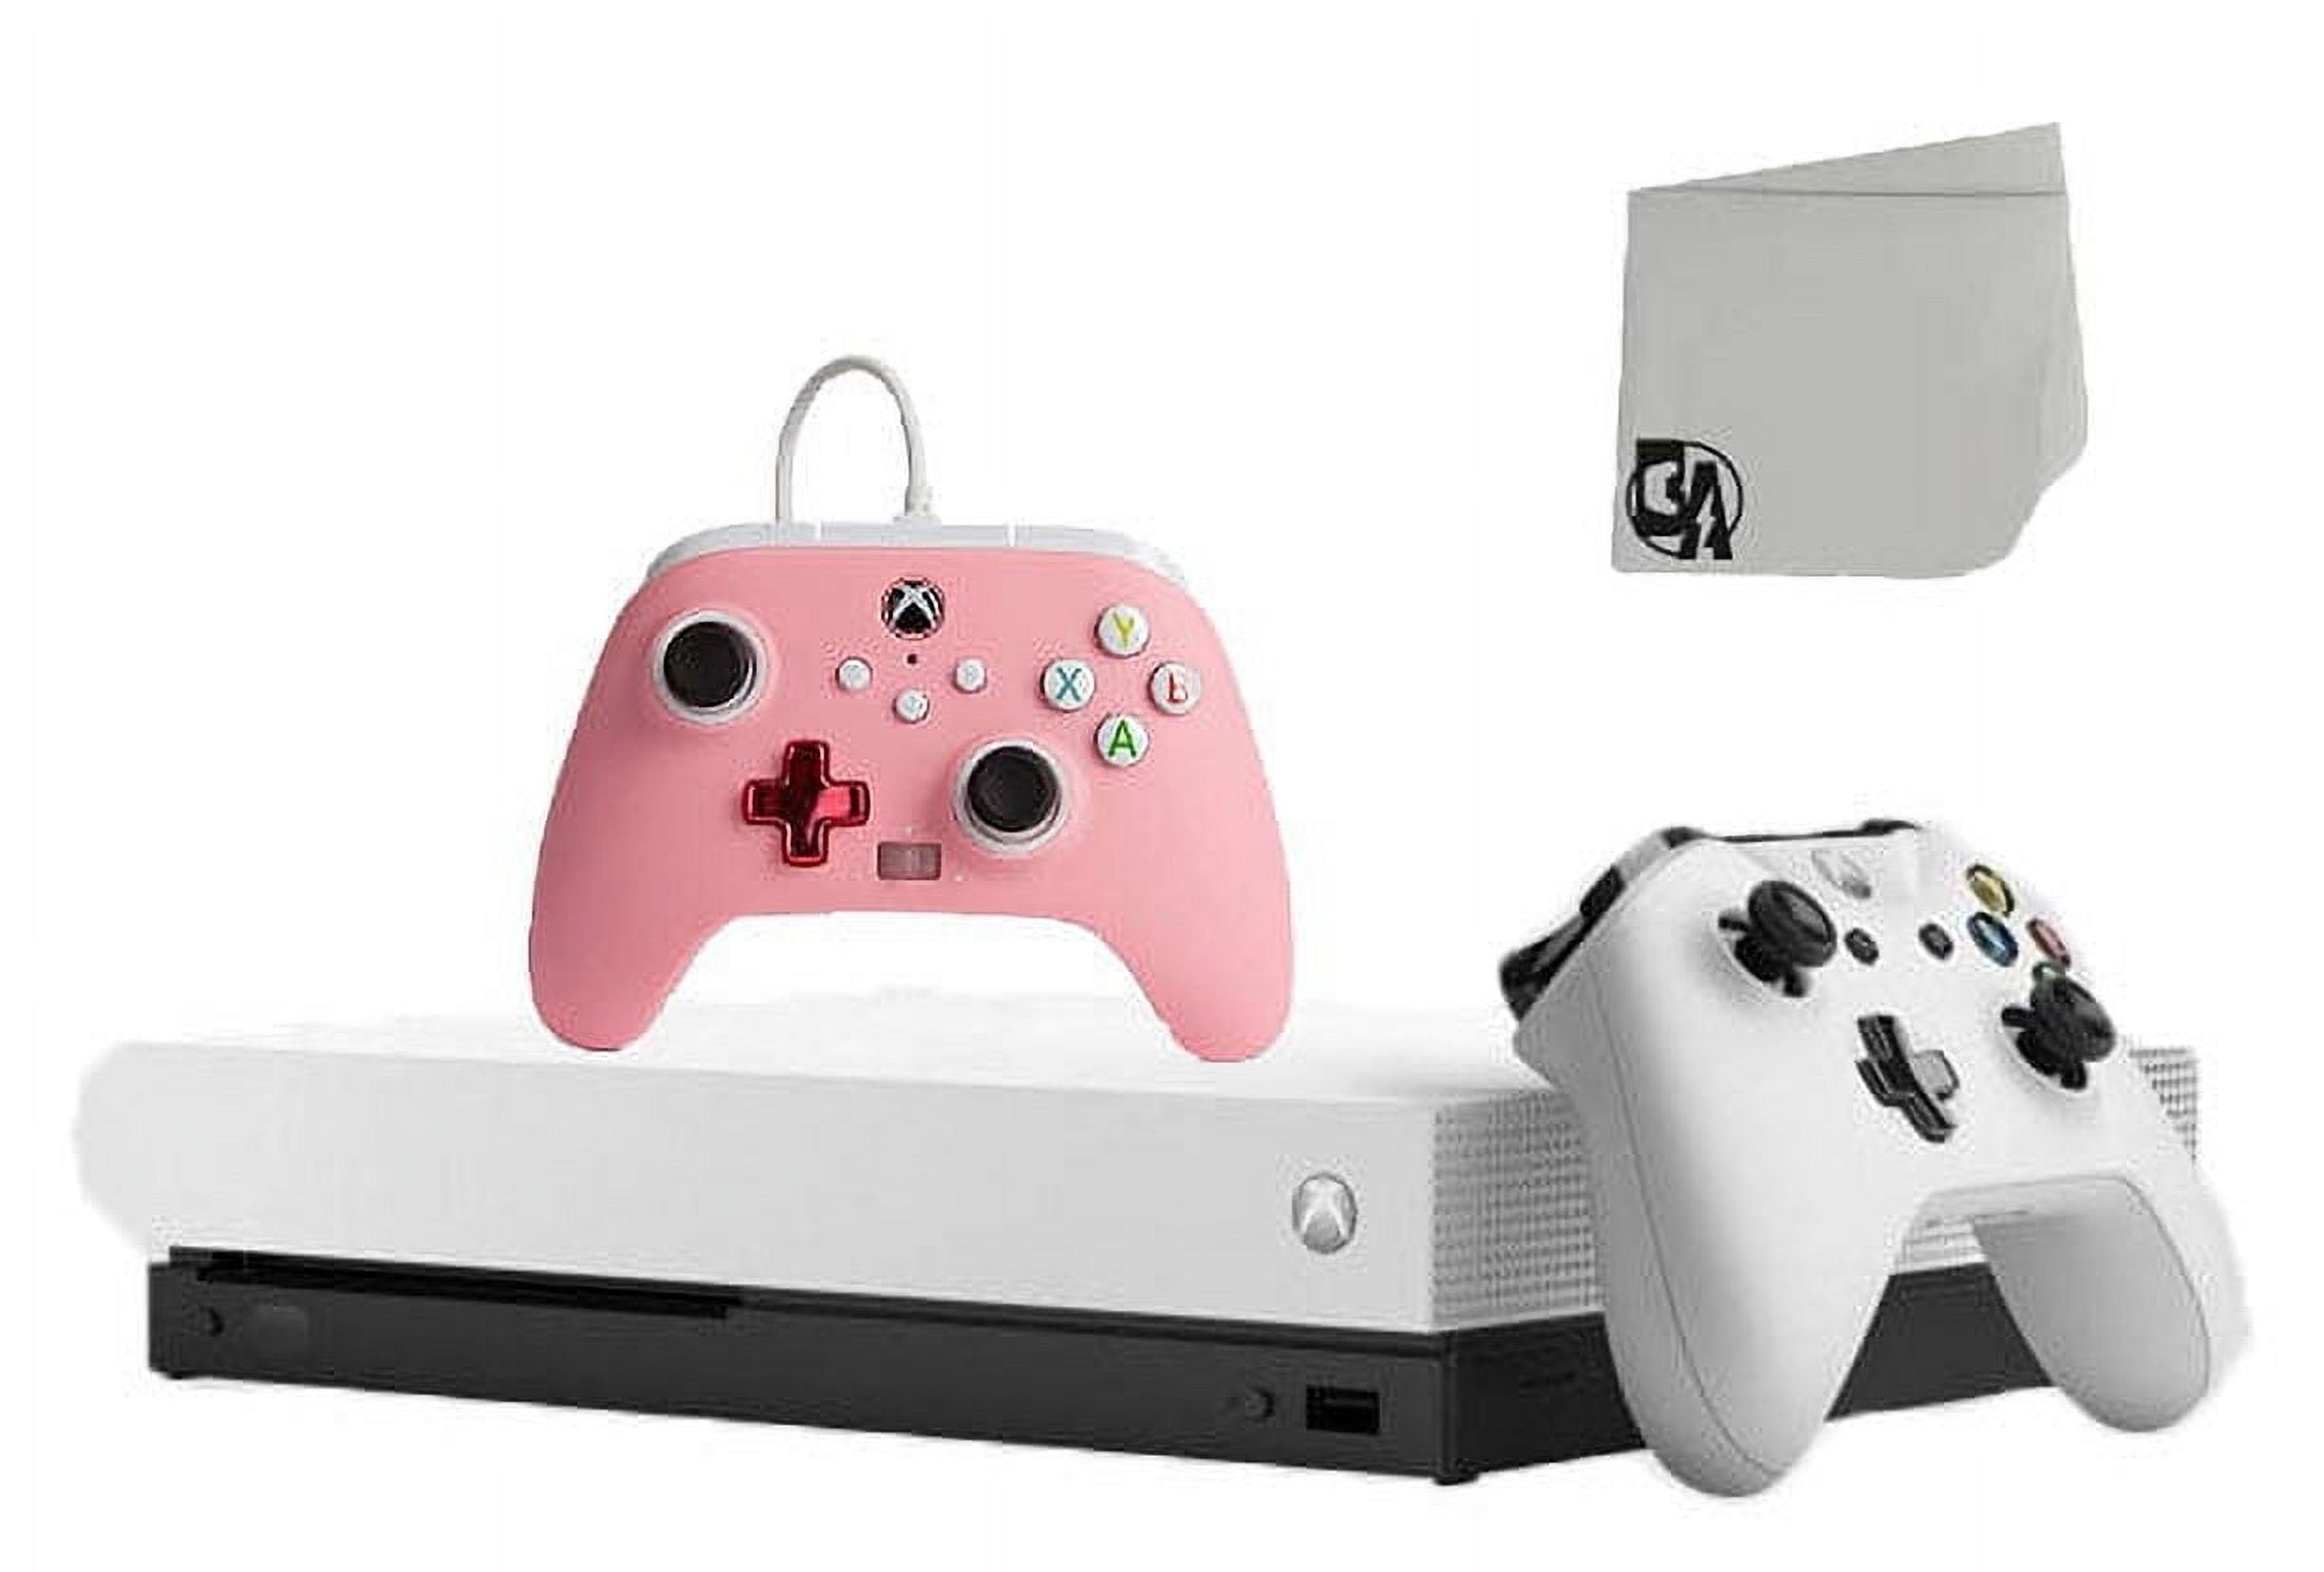 Microsoft Xbox One X 1TB Gaming Console White with Purple Magma Controller  Included BOLT AXTION Bundle Like New 